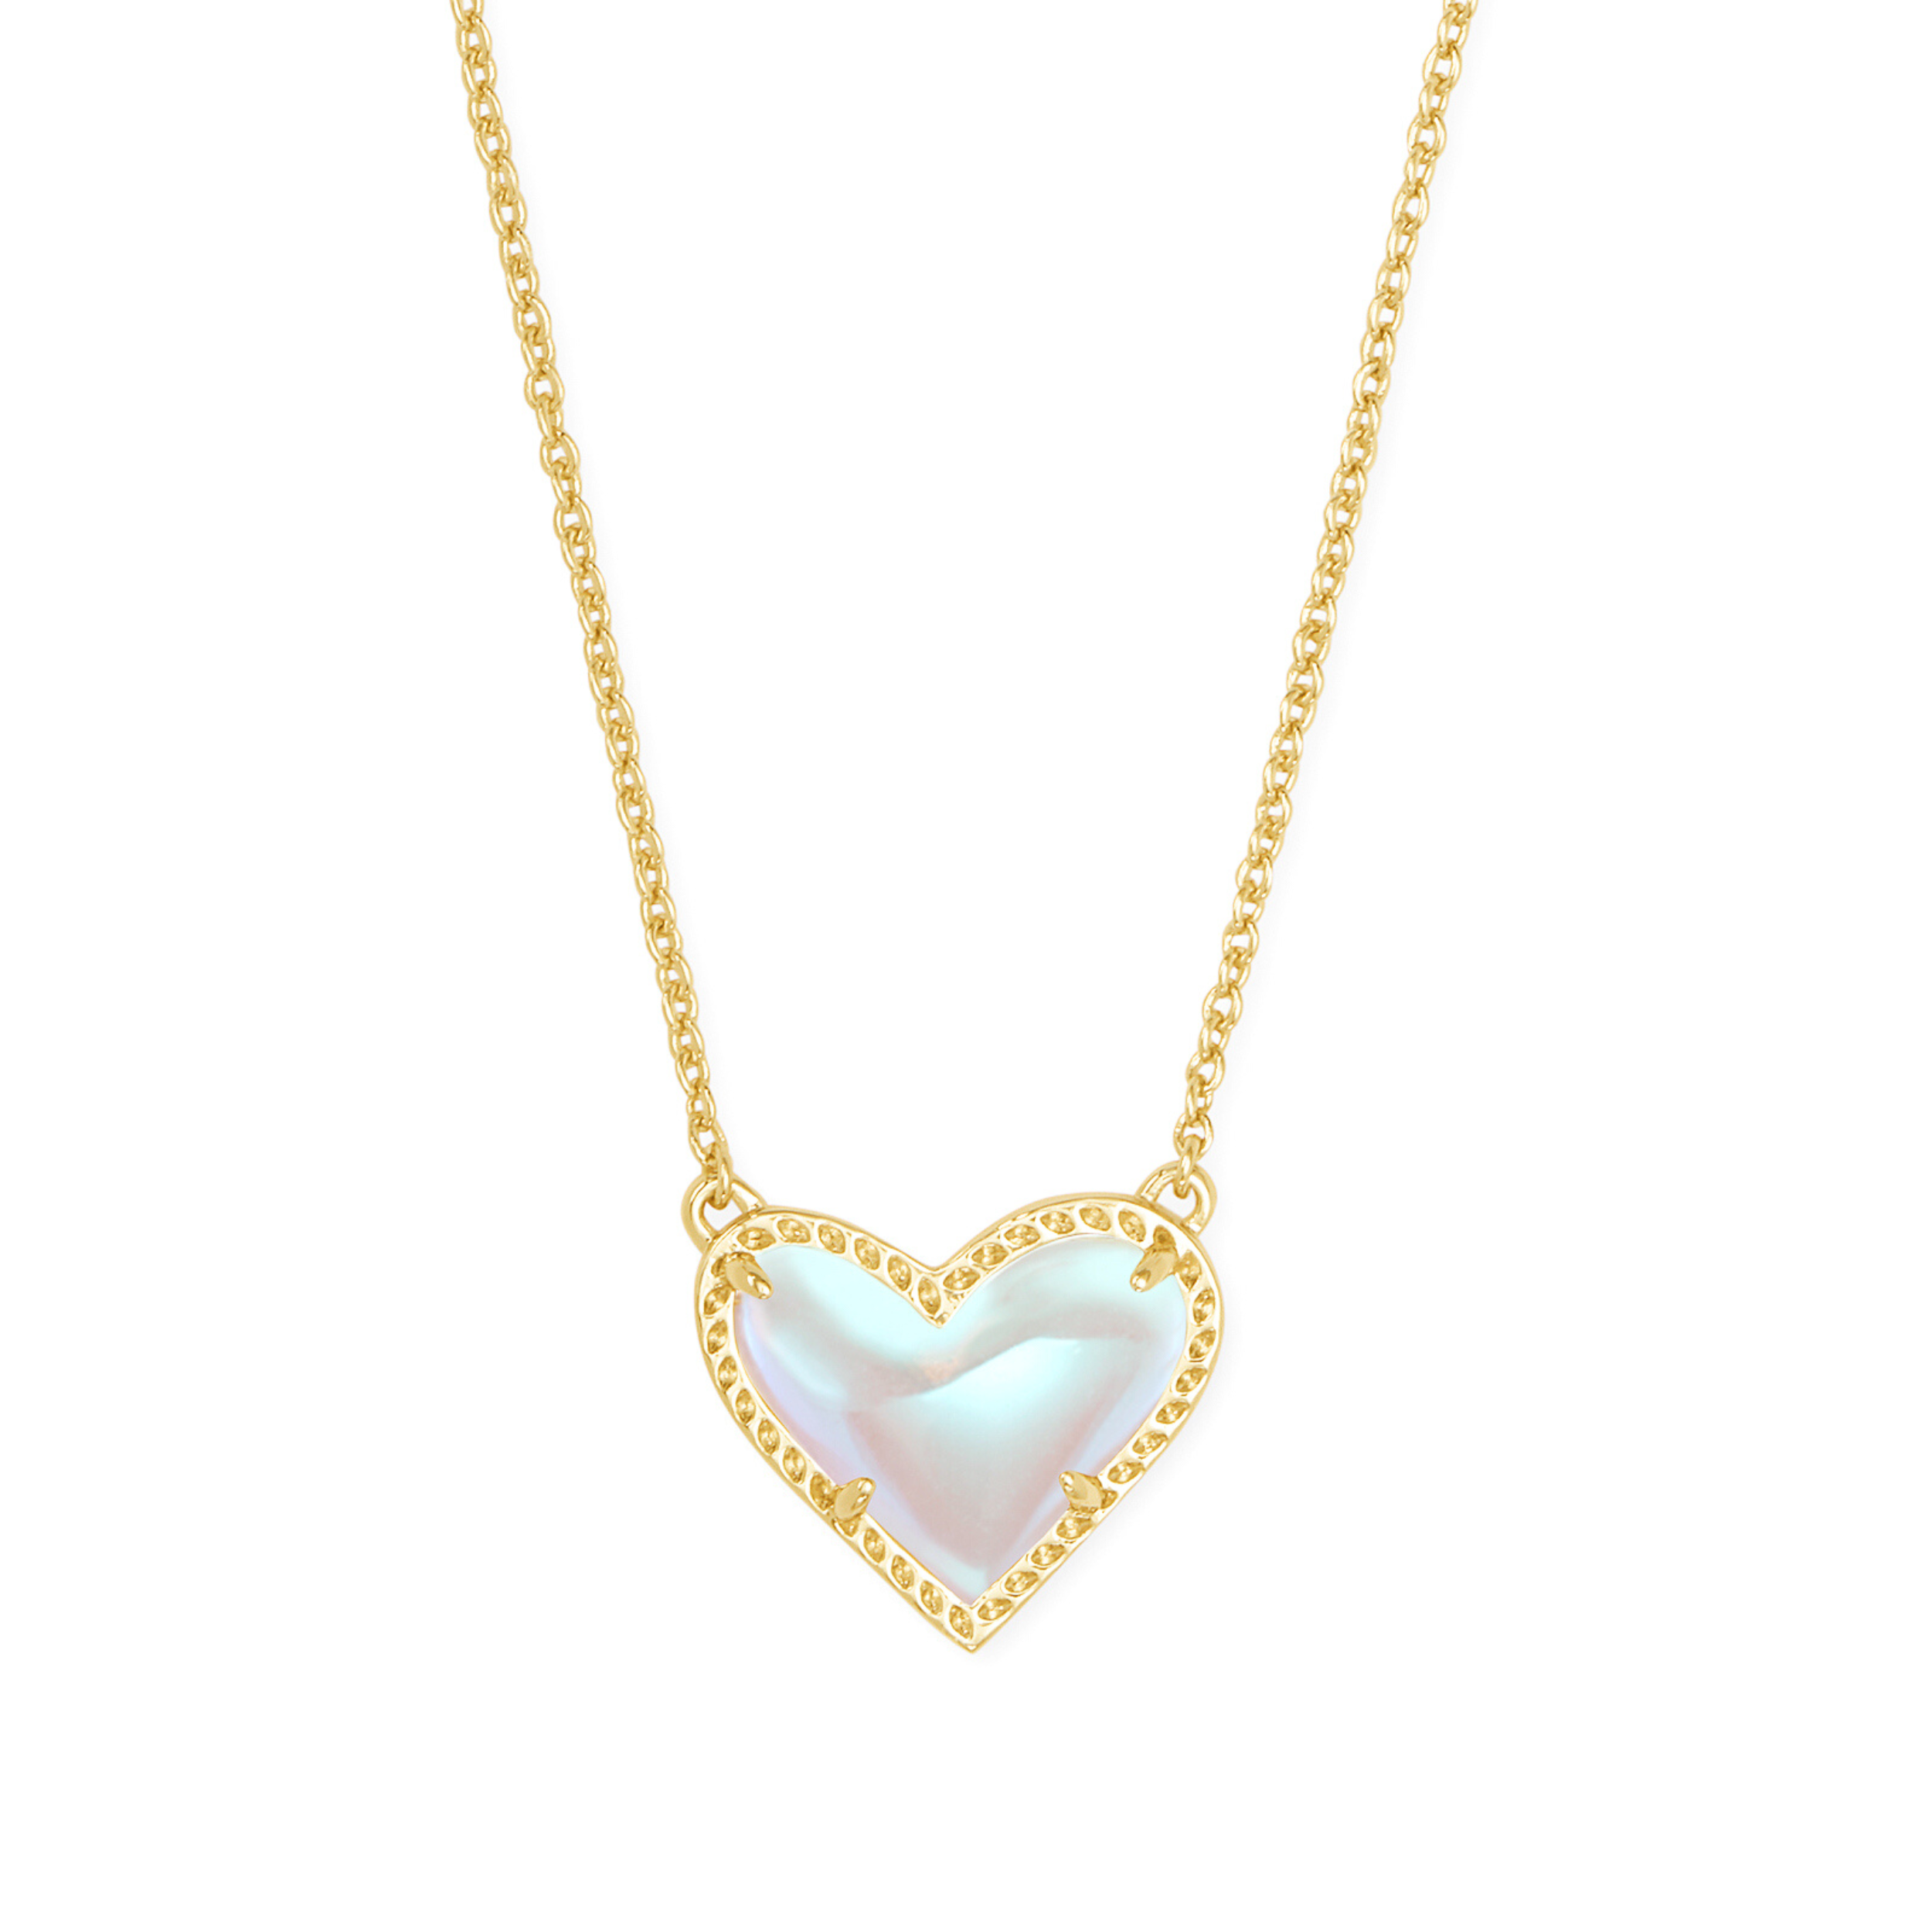 Ari Heart Silver Pendant Necklace in White Crystal